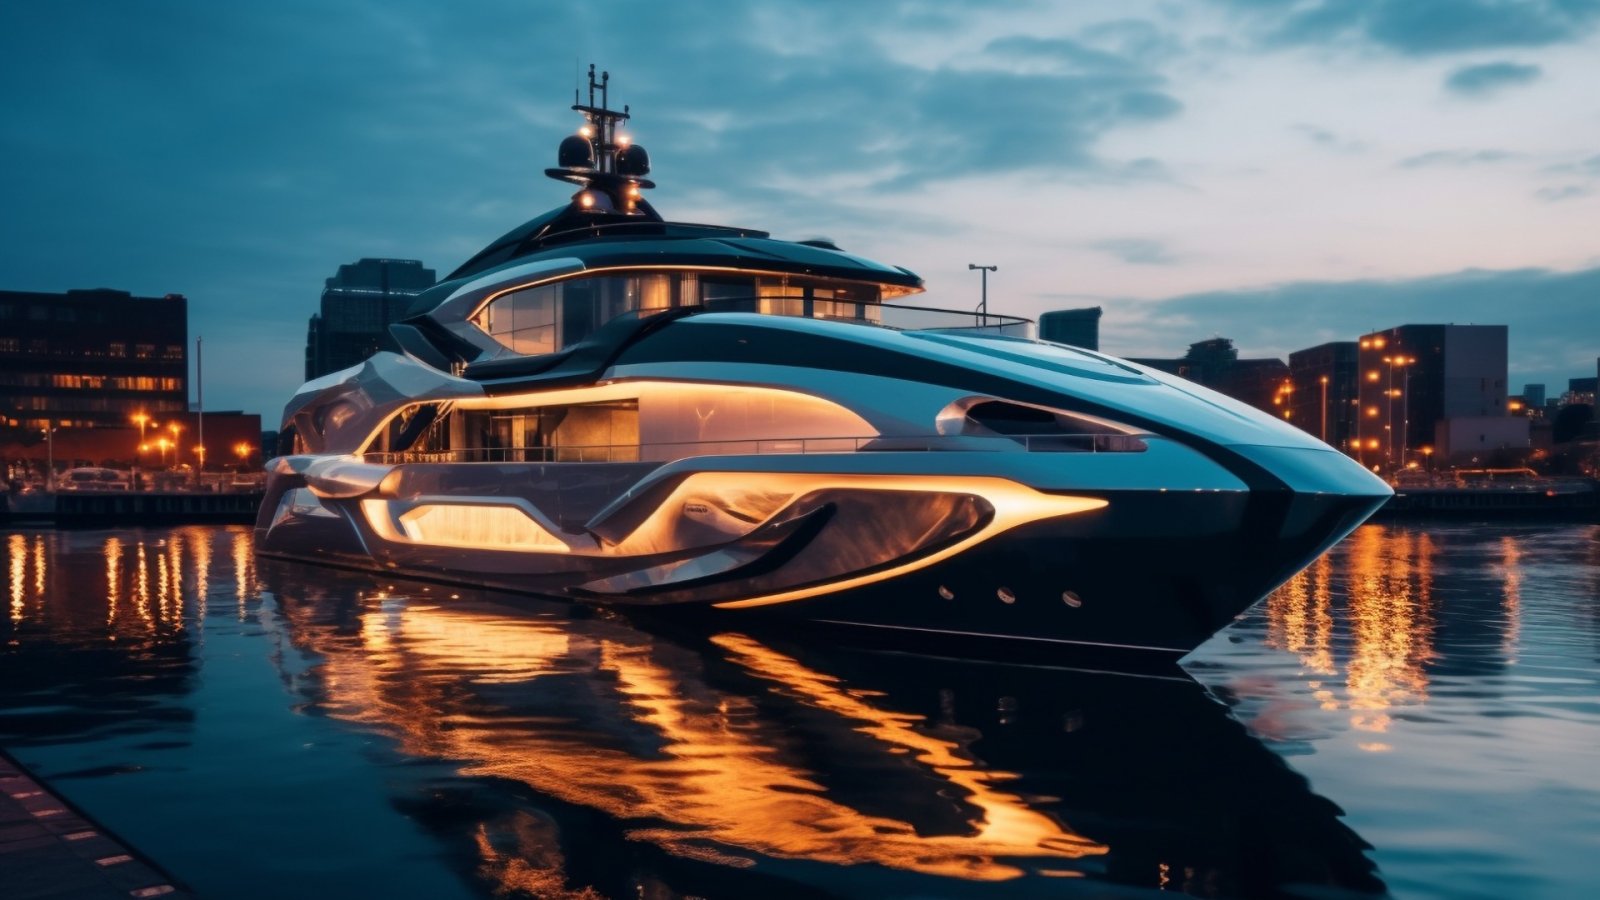 The lavish Pardo GT52 sets a new standard for luxurious yachting